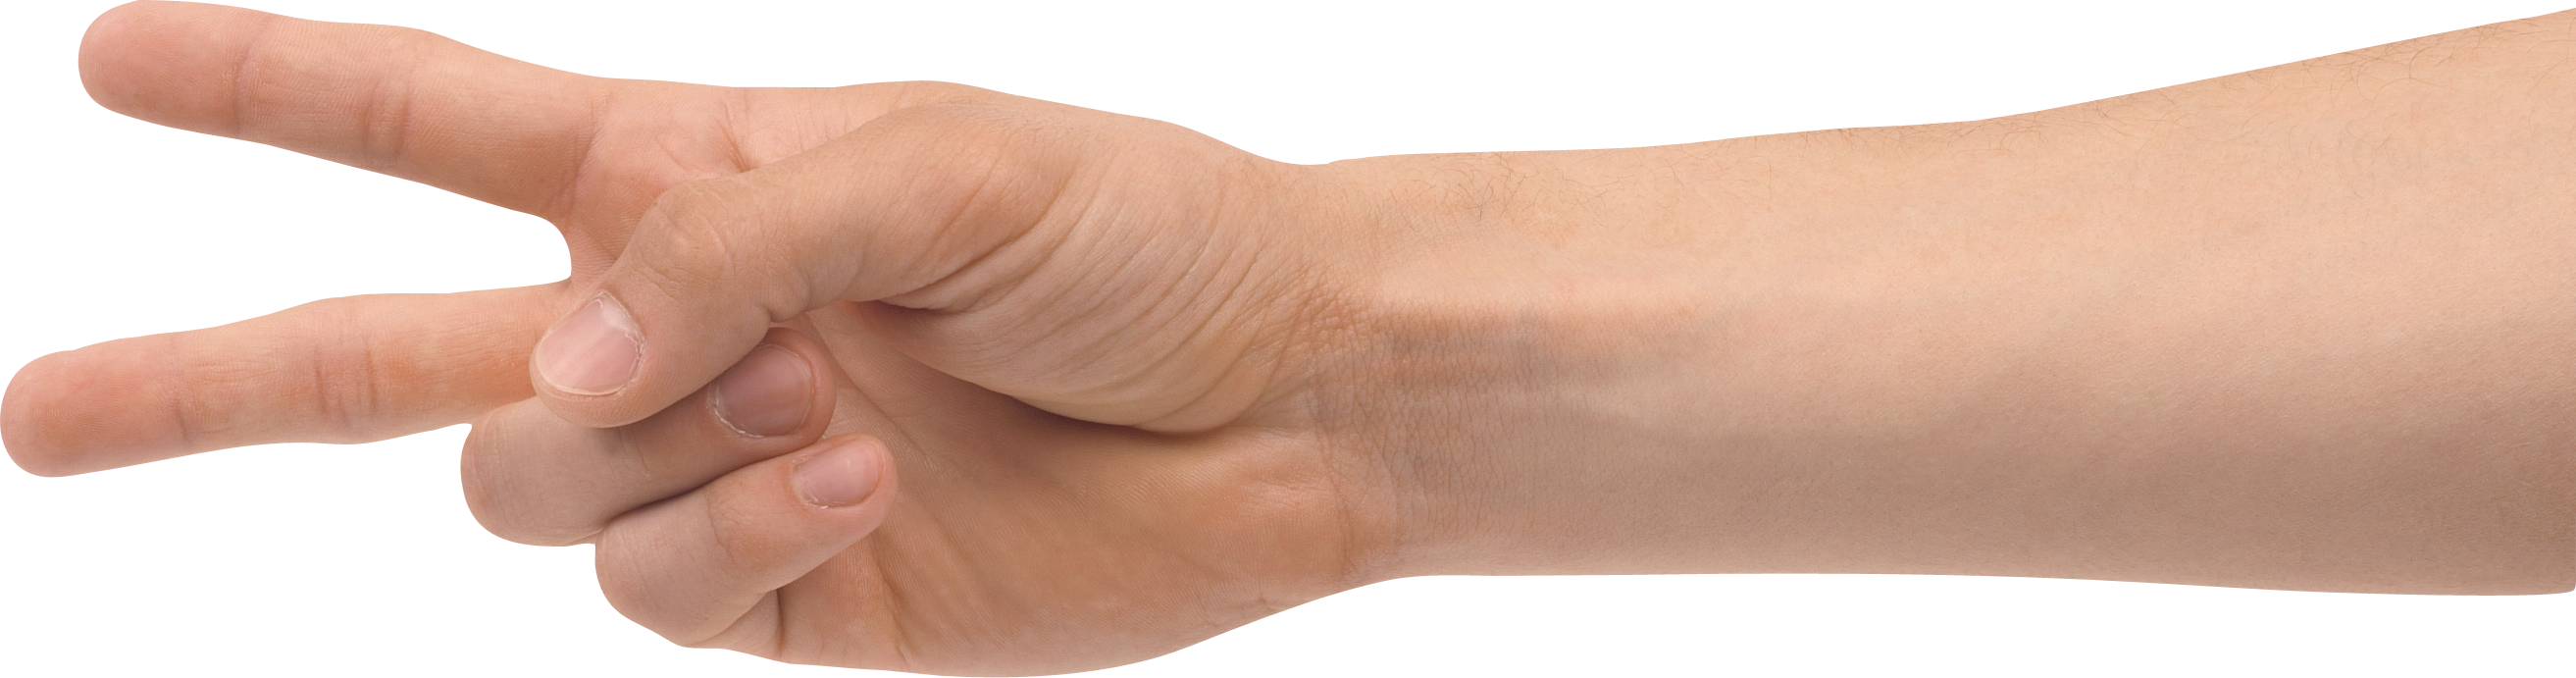 Hands PNG, hand image free